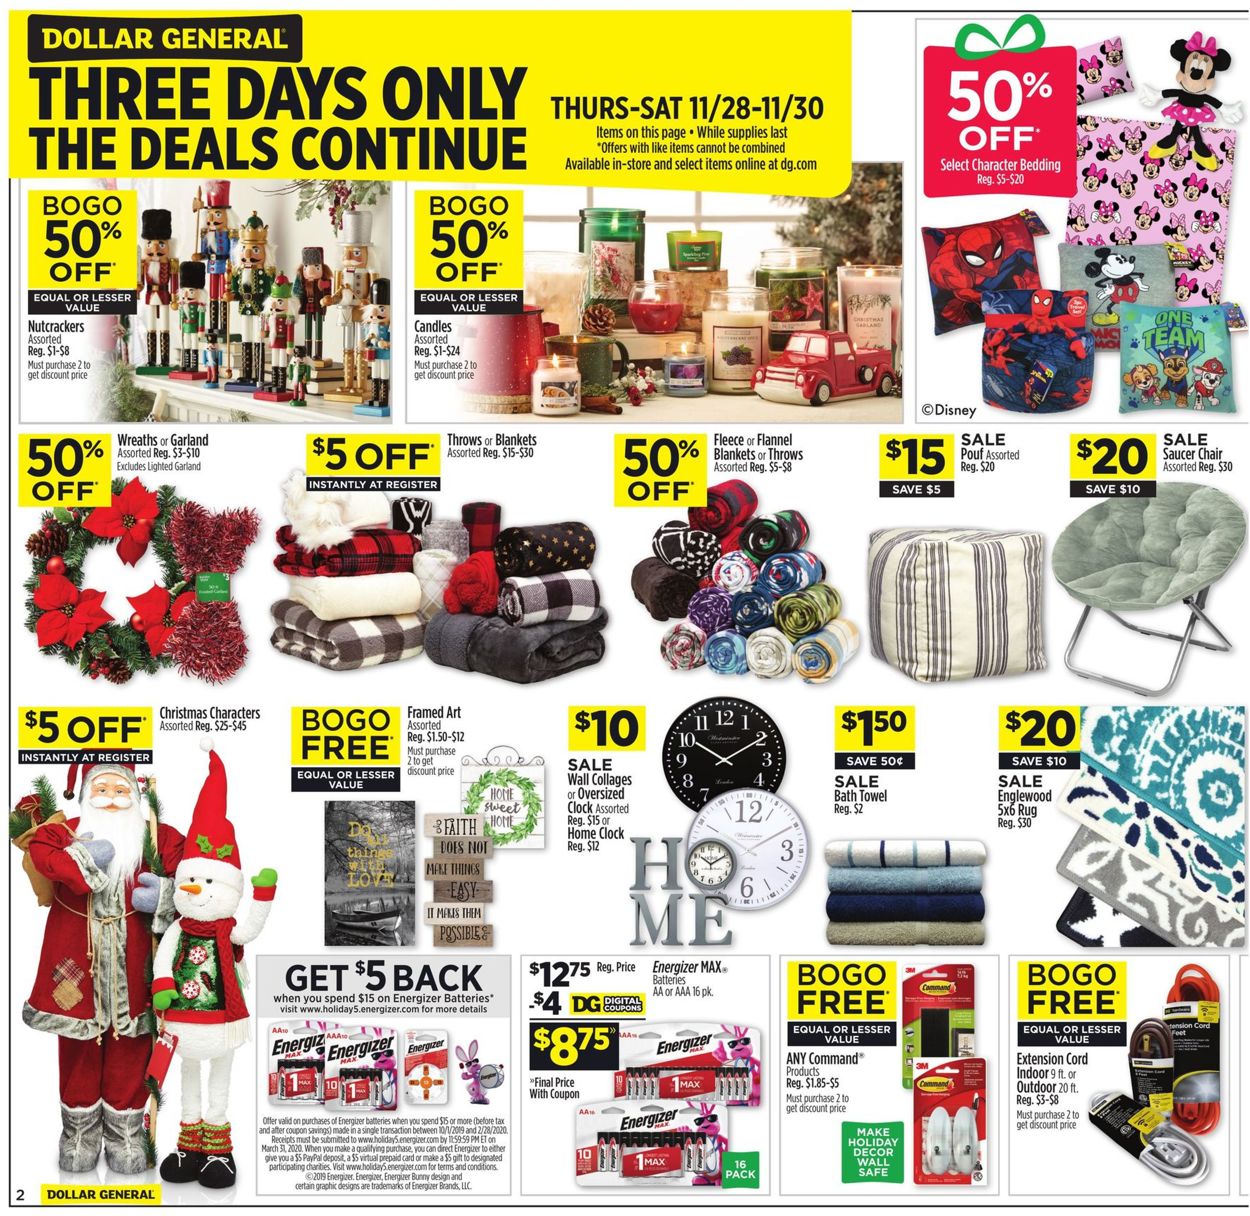 Dollar General Current Weekly Ad 11 28 11 30 2019 Frequent Adscom